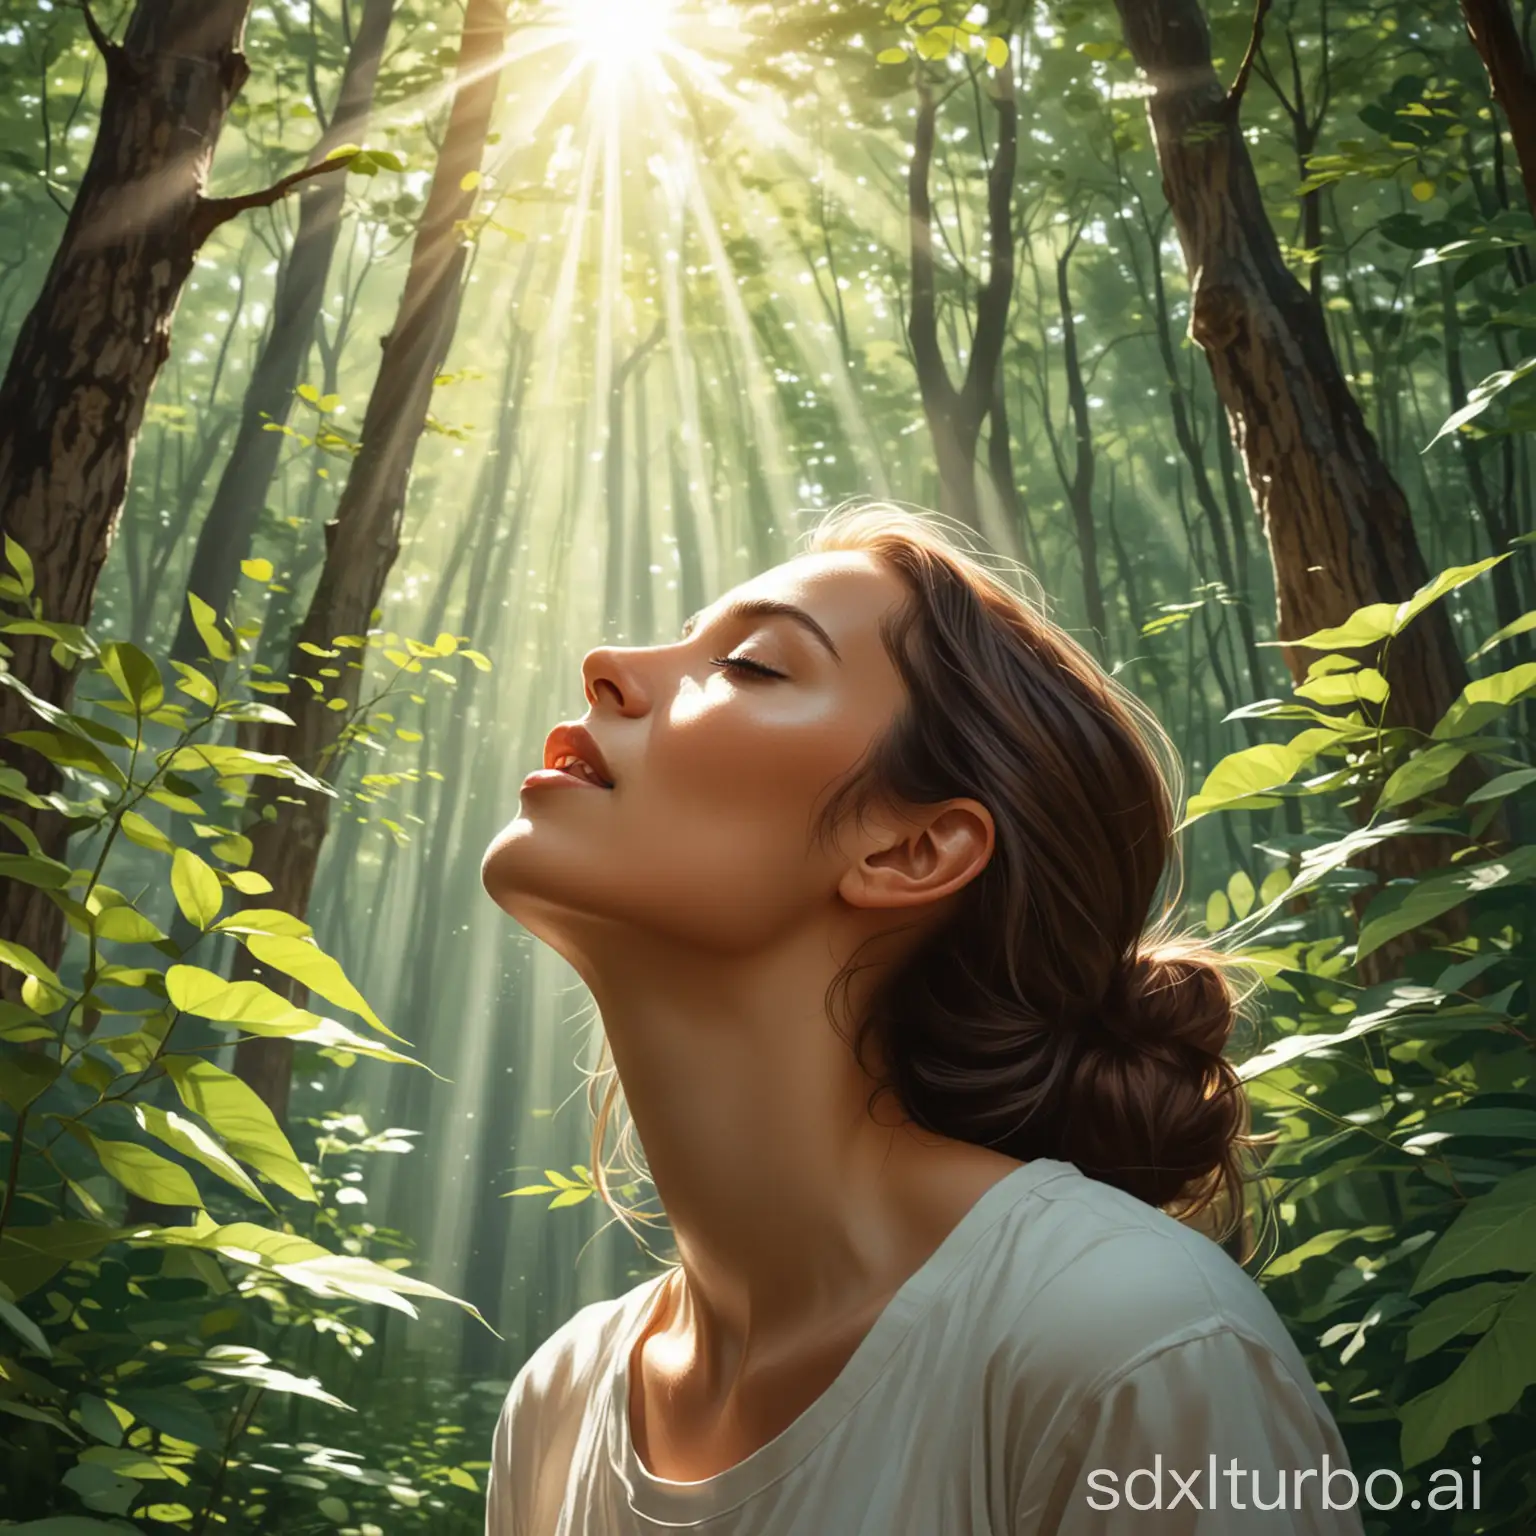 A picture in illustration style, showing a person taking a deep breath in a tranquil forest, sunlight streaming through the leaves onto her body, her face filled with peace and tranquility.